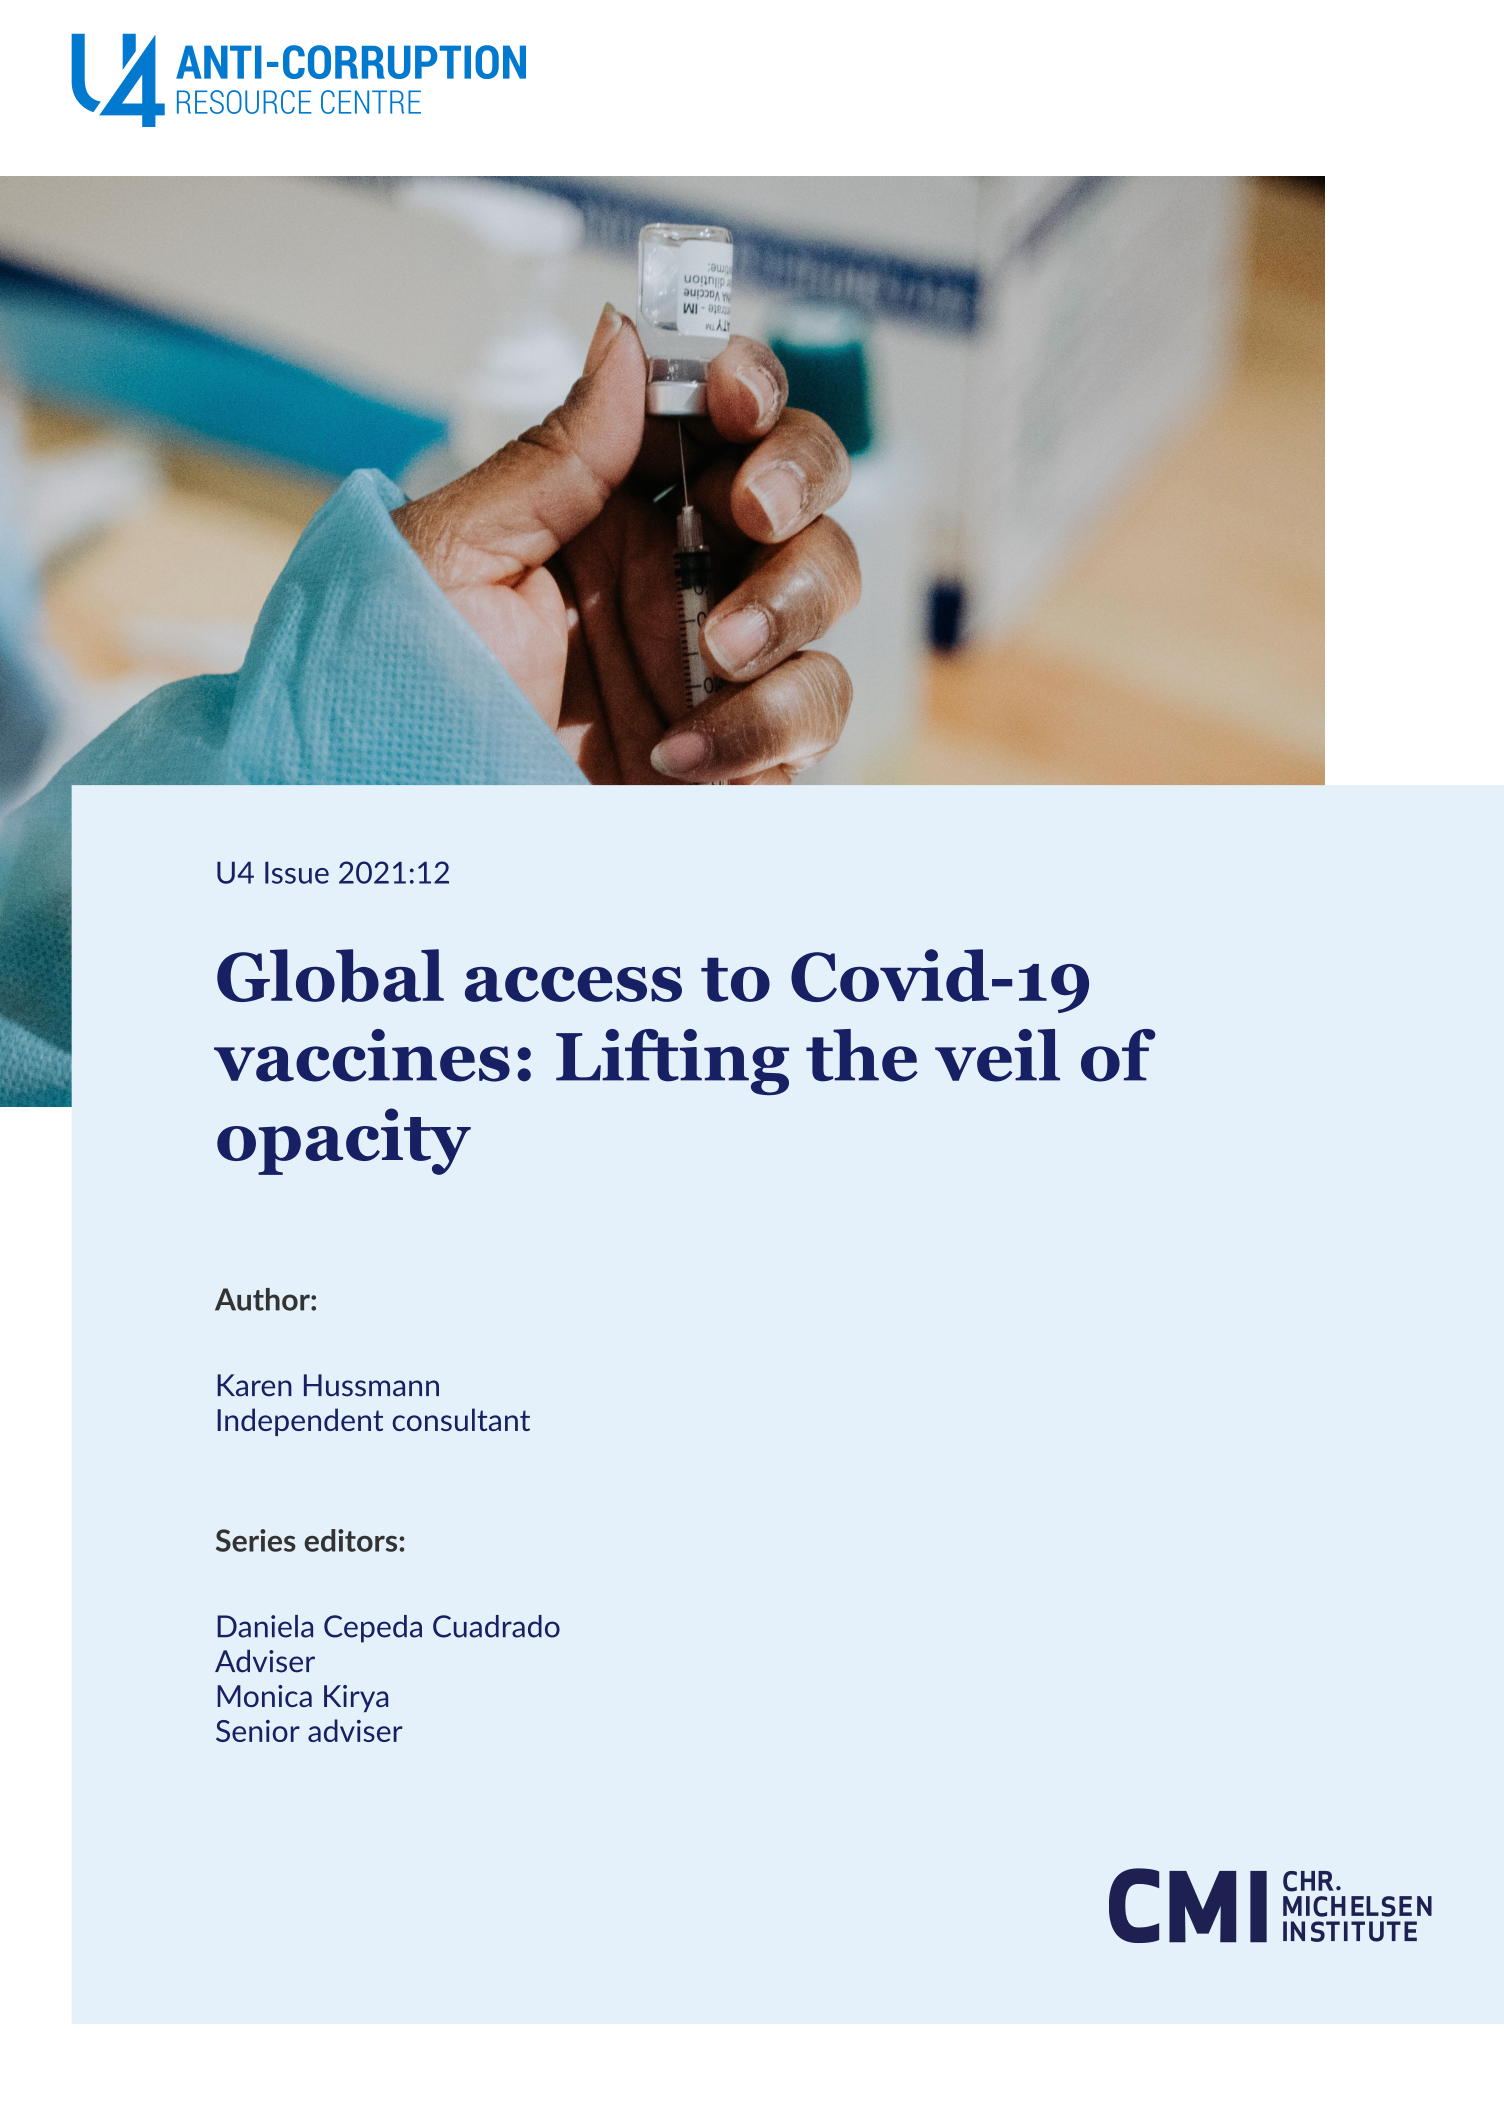 Global access to Covid-19 vaccines: Lifting the veil of opacity